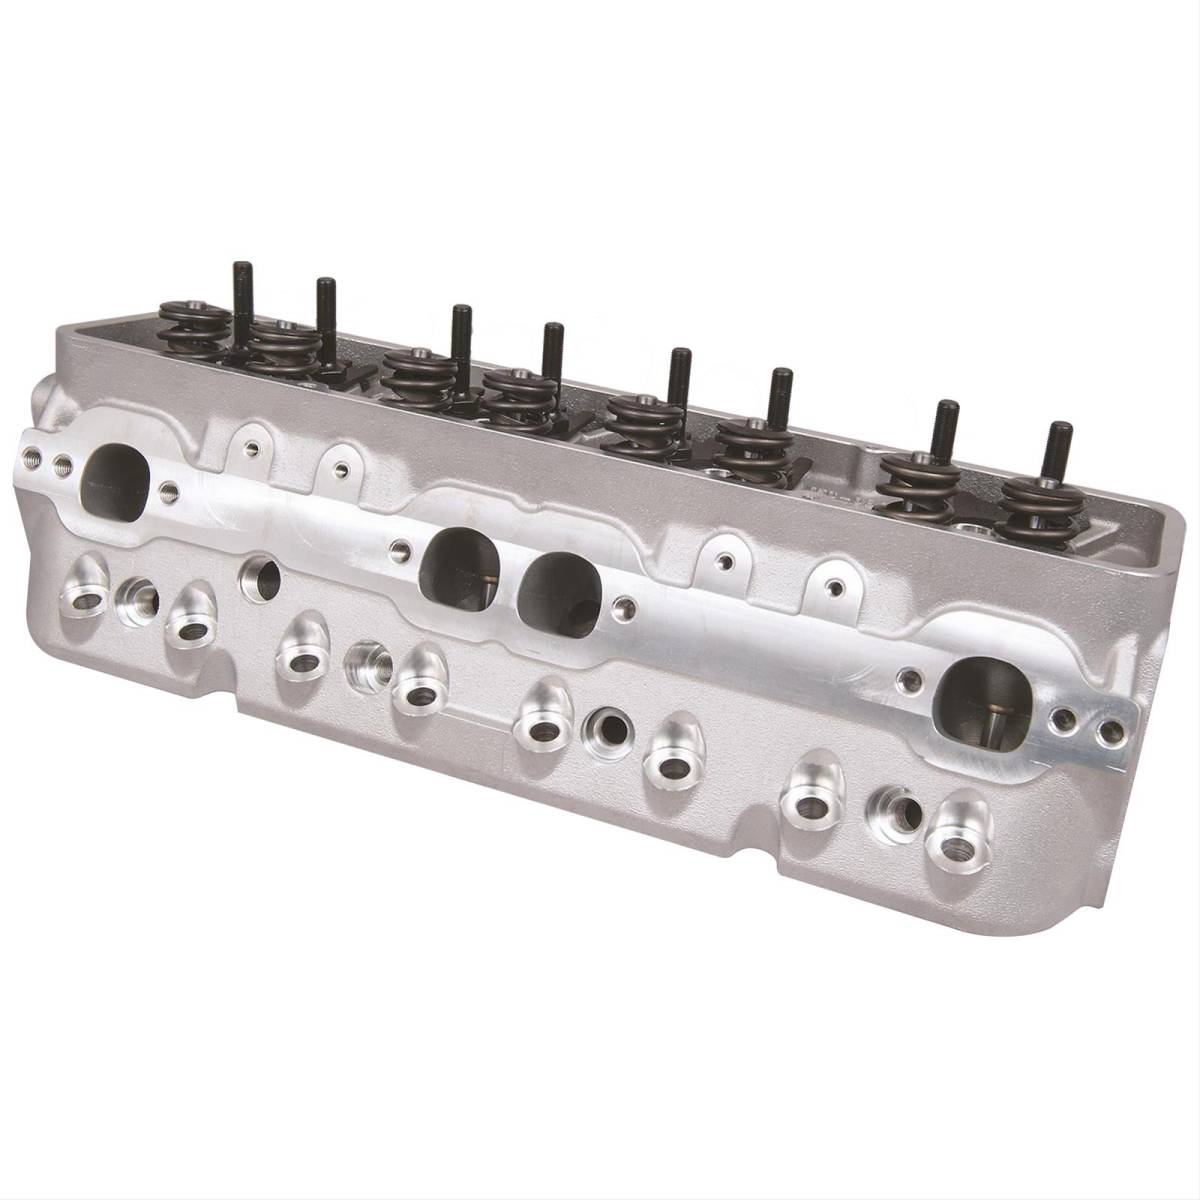 Trickflow - Trickflow Super 23 Cylinder Heads, SB Chevy, 195cc Intake, 64cc Chambers, 1.460" Dual Springs, Center Bolt - Image 1